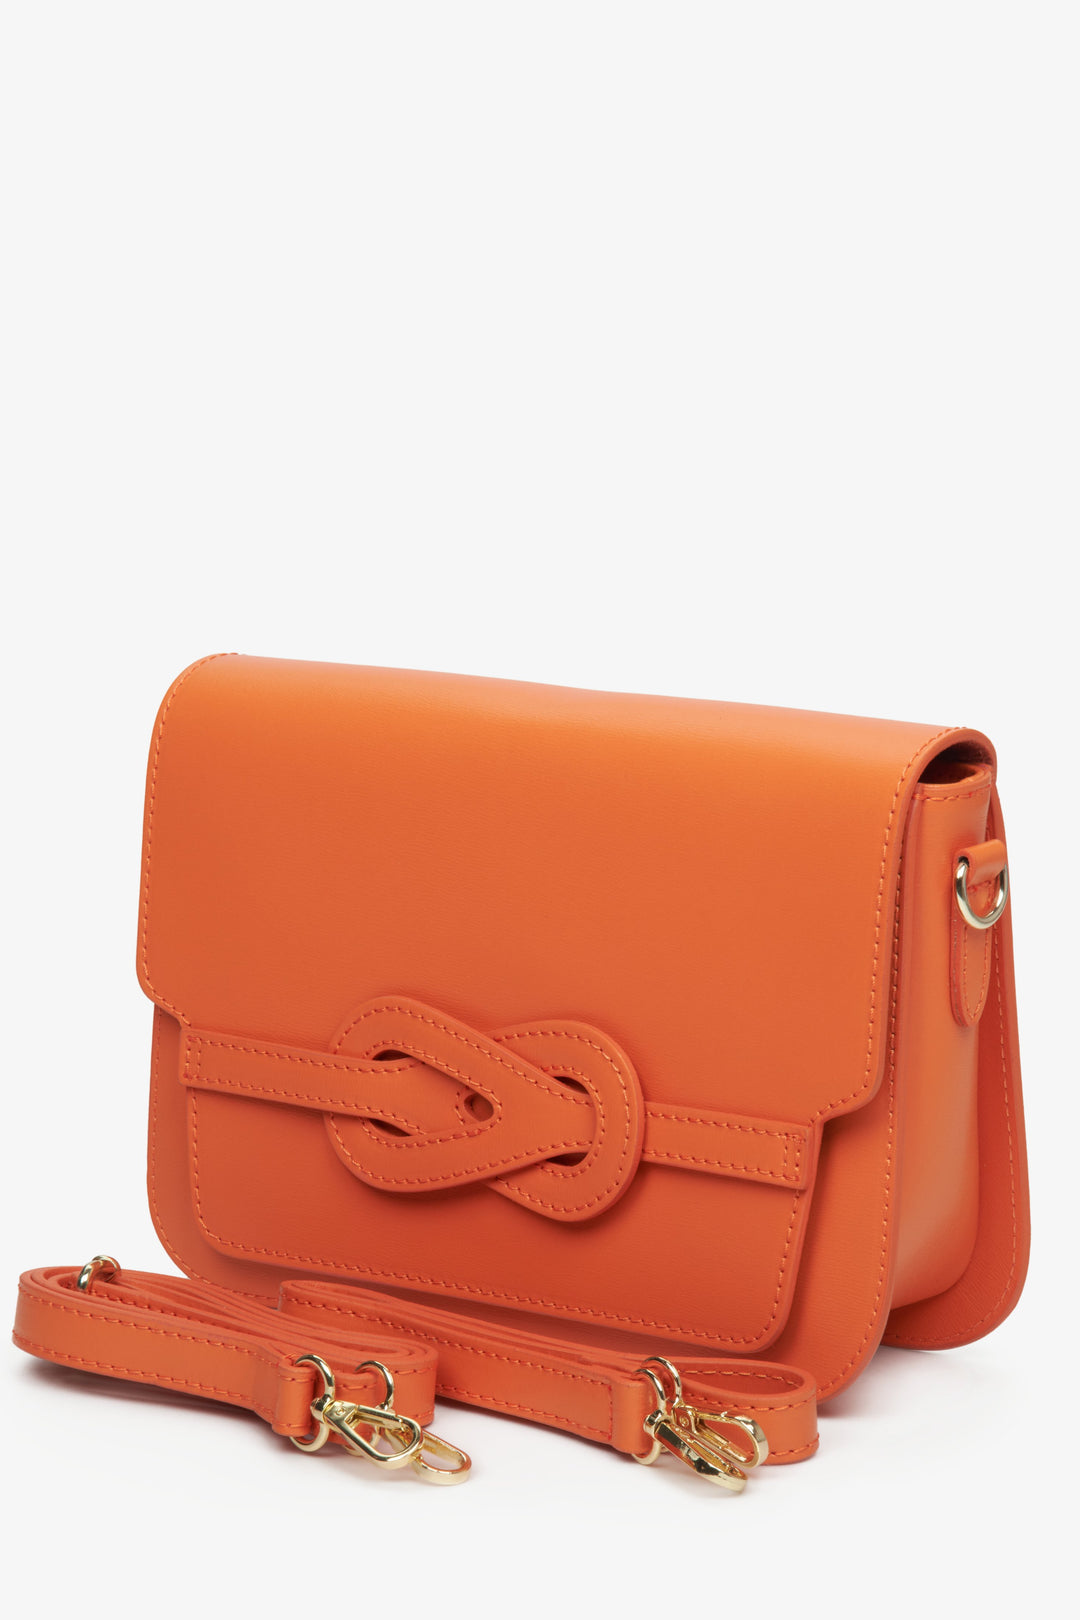 Handbag for women made of natural leather of Italian production - the front part of the model in orange.